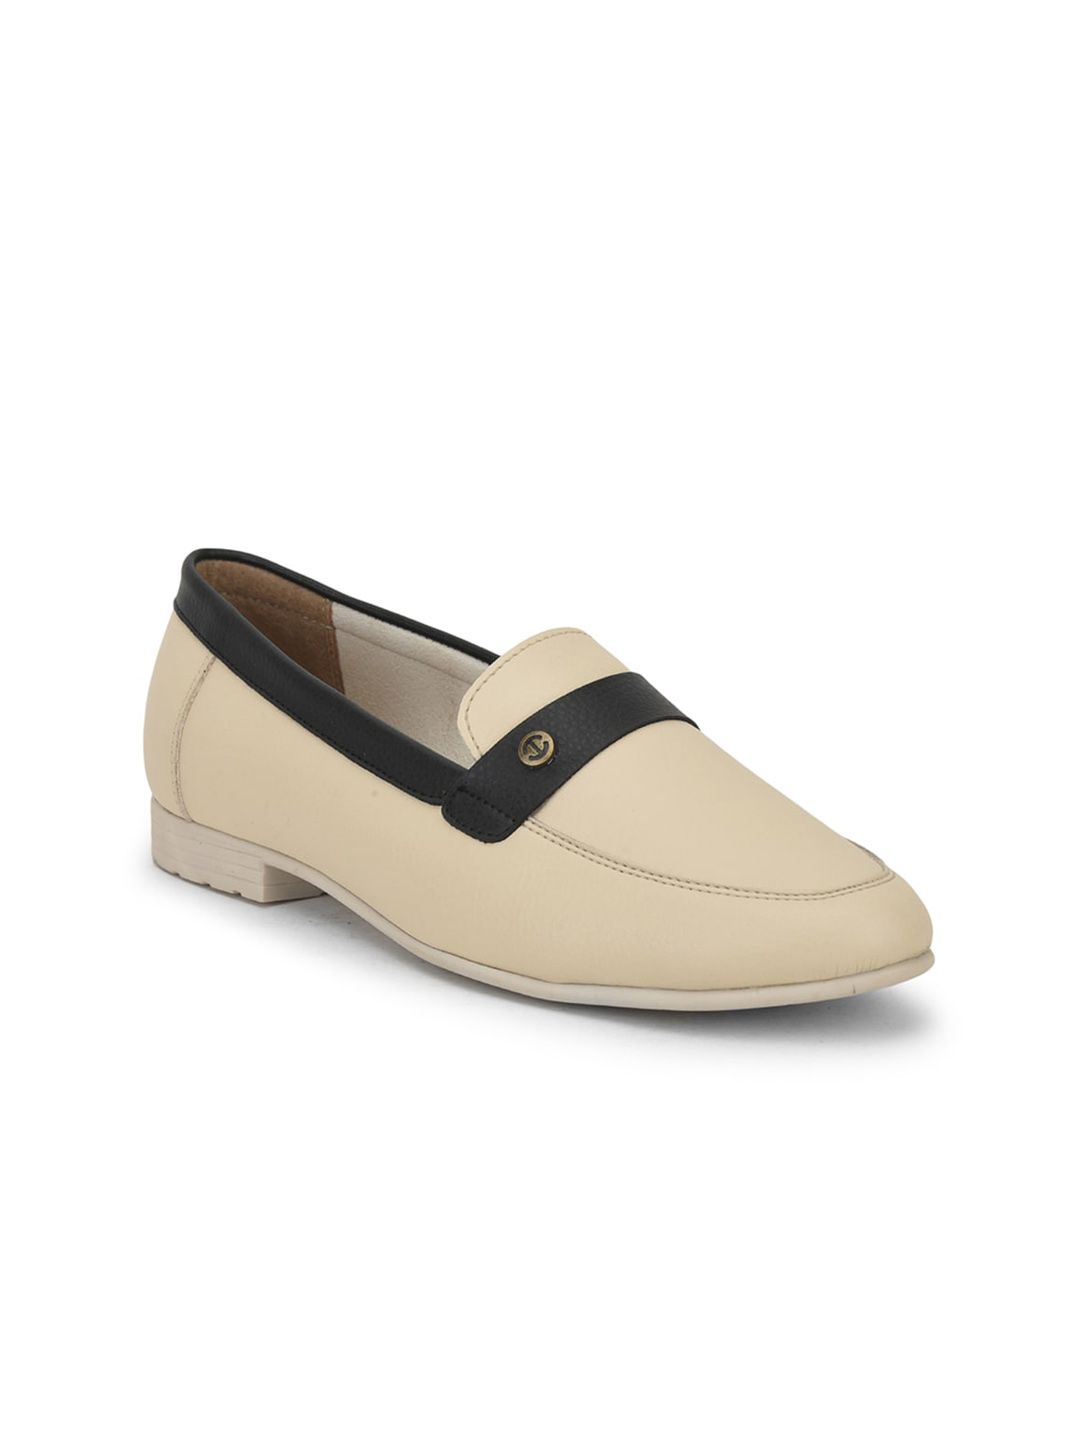 Liberty Women Beige Colourblocked Loafers Price in India